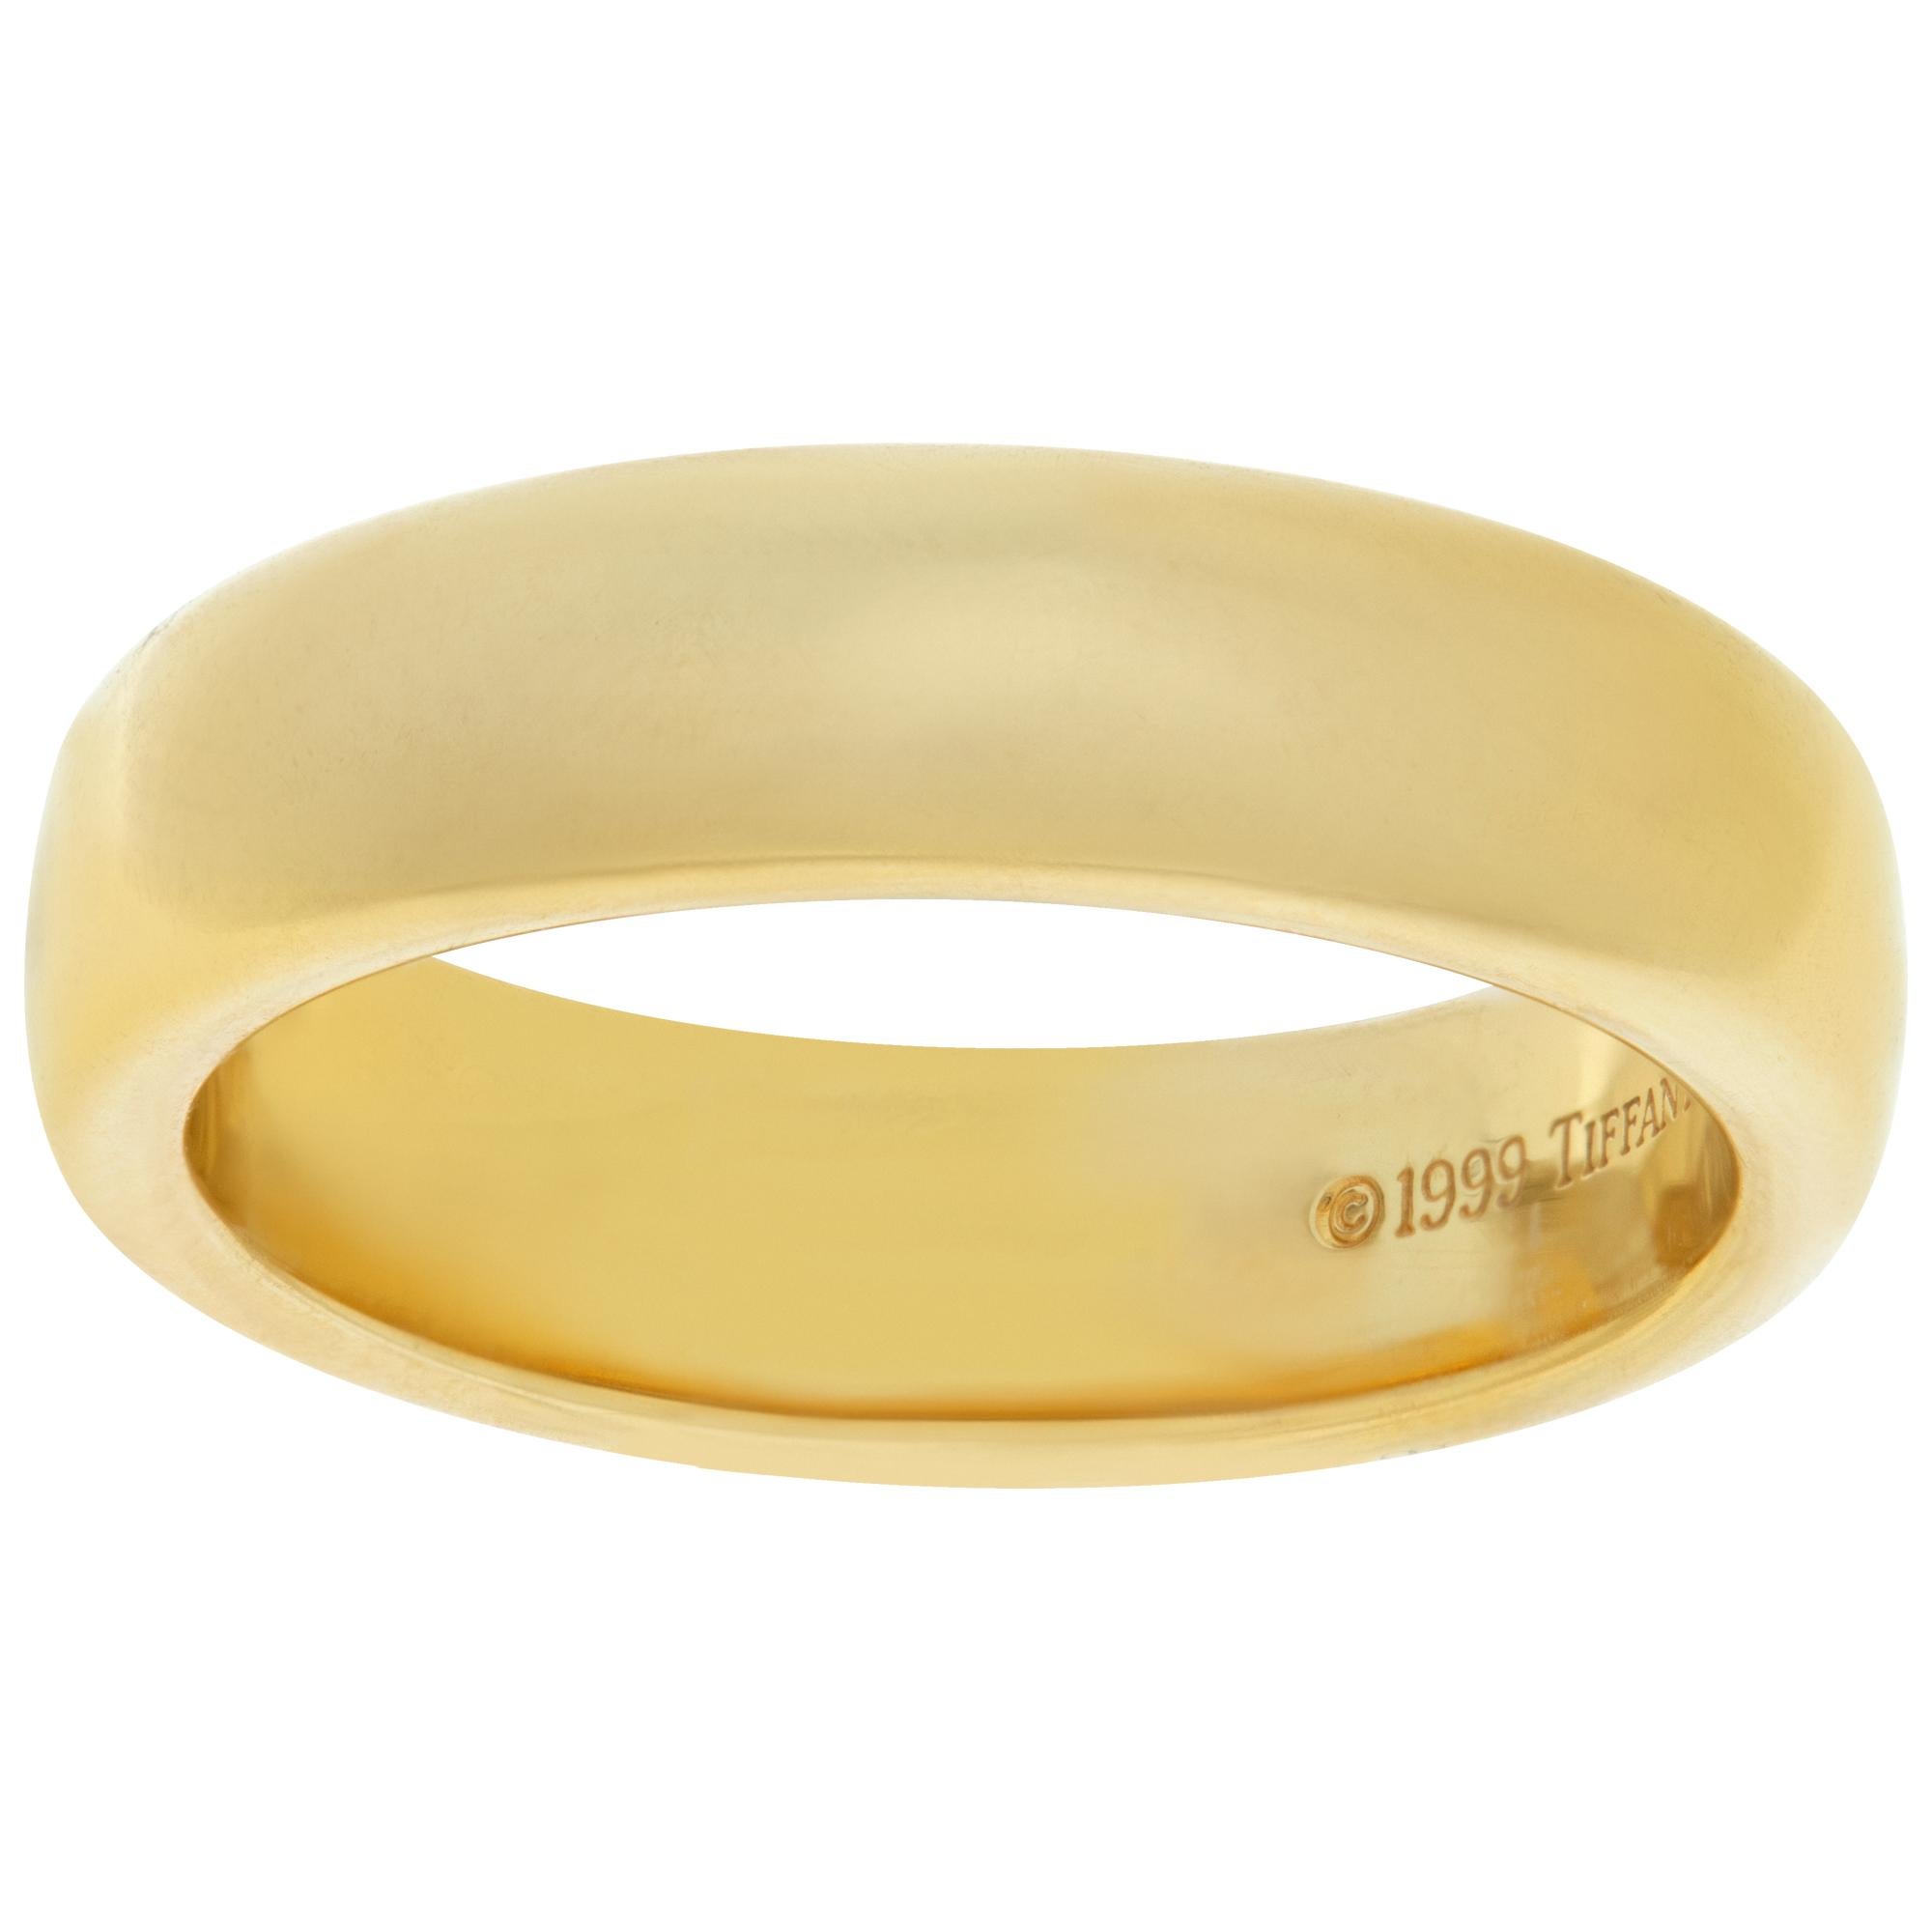 Tiffany & Co. Classic 18k Yellow Gold Wedding Band in